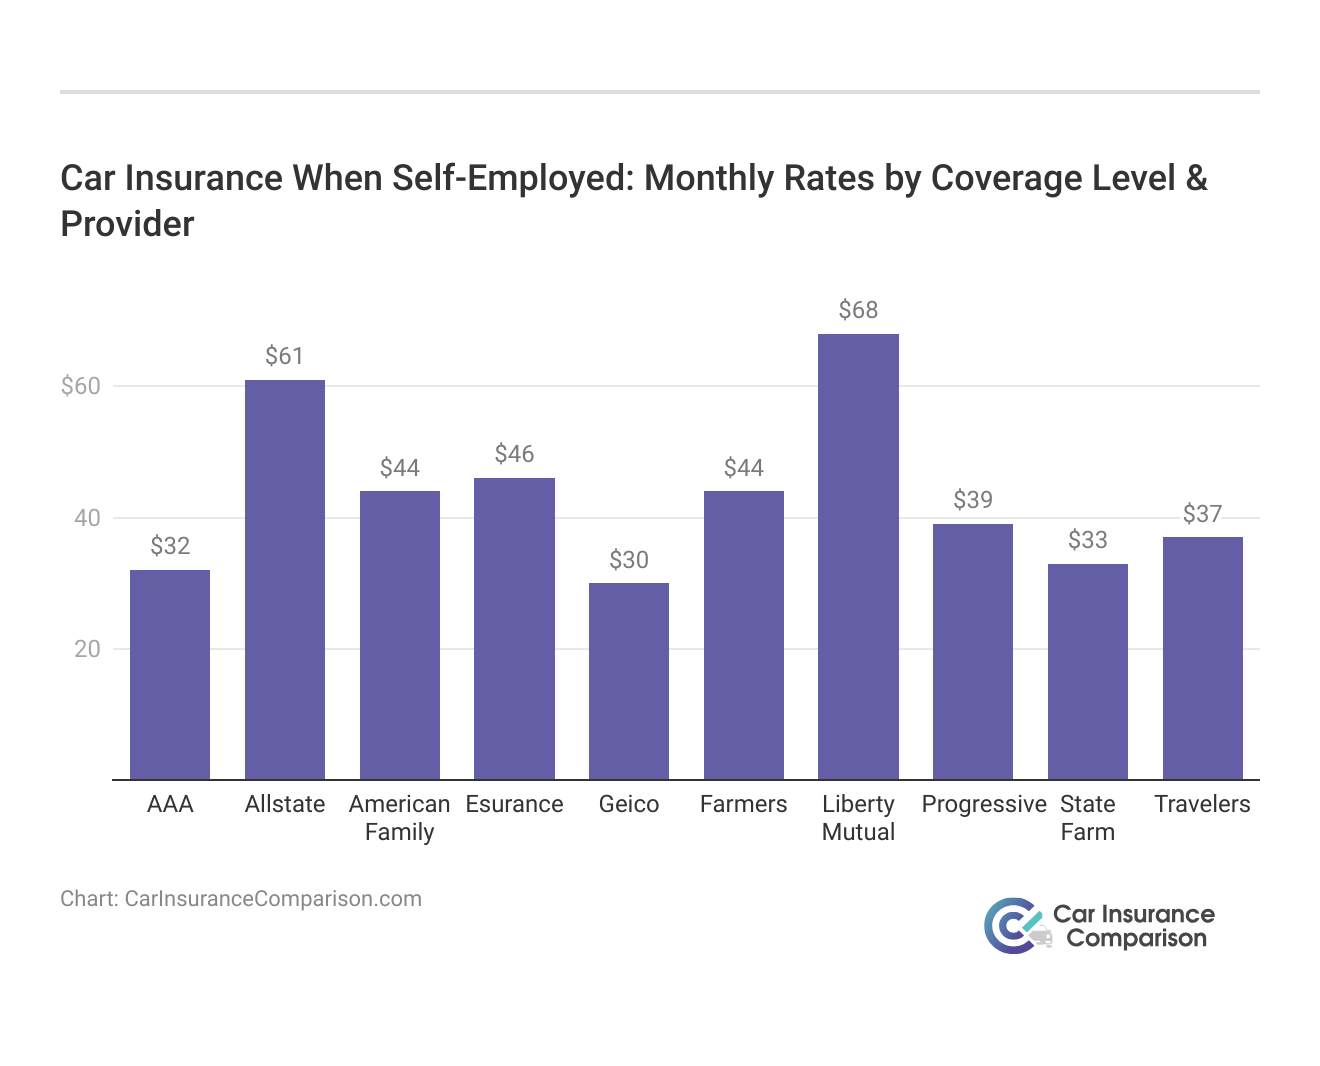 <h3>Car Insurance When Self-Employed: Monthly Rates by Coverage Level & Provider</h3>